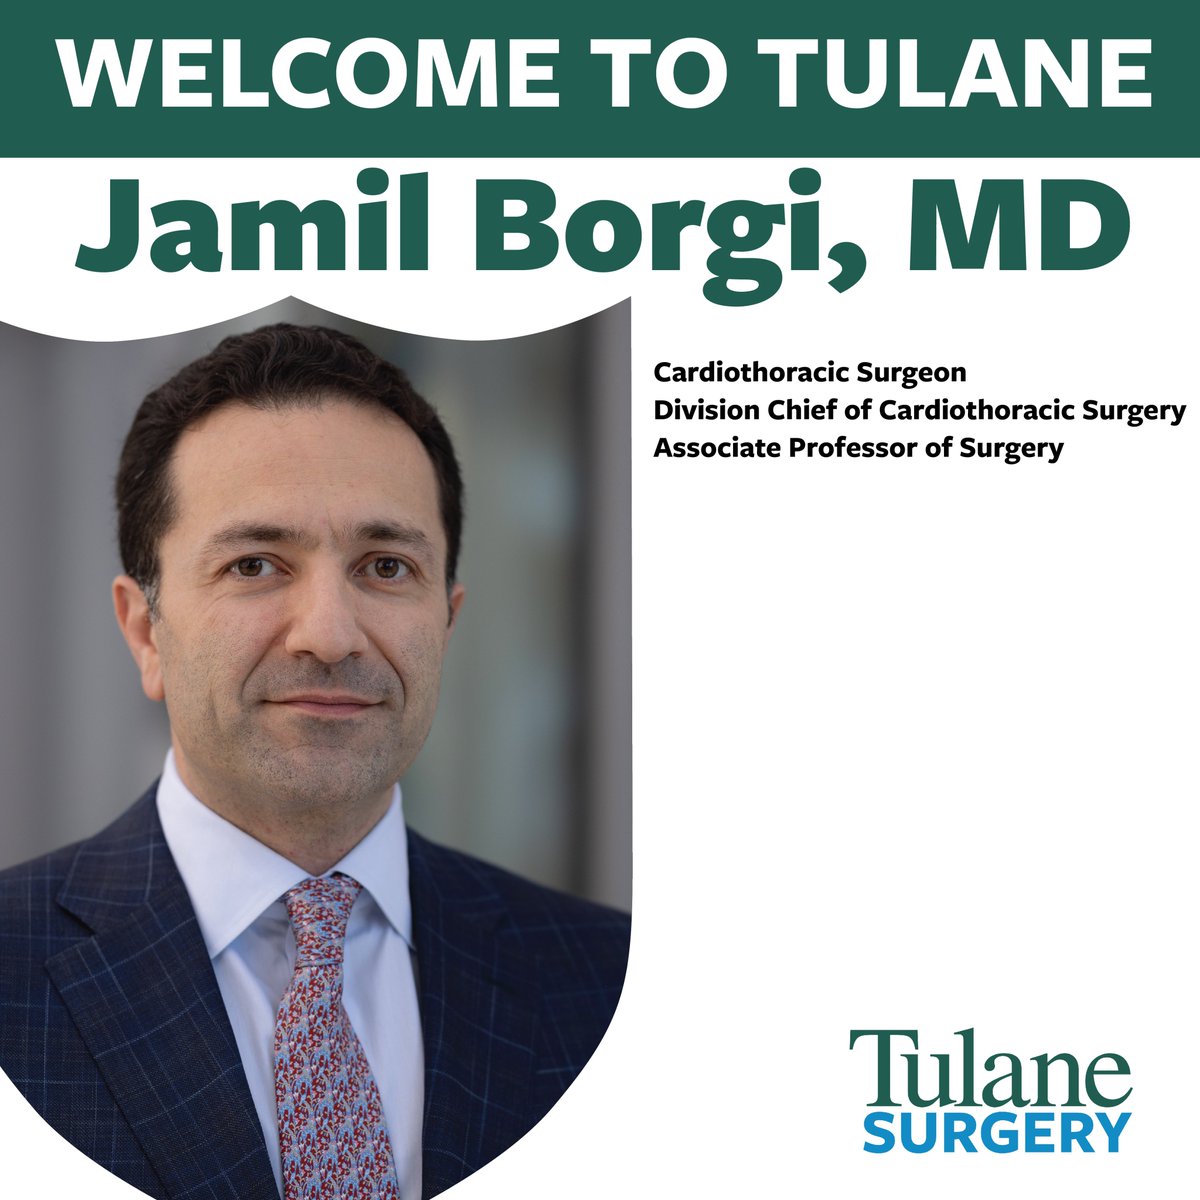 Please join us in welcoming Dr. Jamil Borgi, who is reestablishing our Division of Cardiothoracic Surgery. Dr. Borgi will join us as an associate professor of surgery and serve as the division chief of cardiothoracic surgery. Welcome, Dr. Borgi, to Tulane Surgery! #tulanesurgery